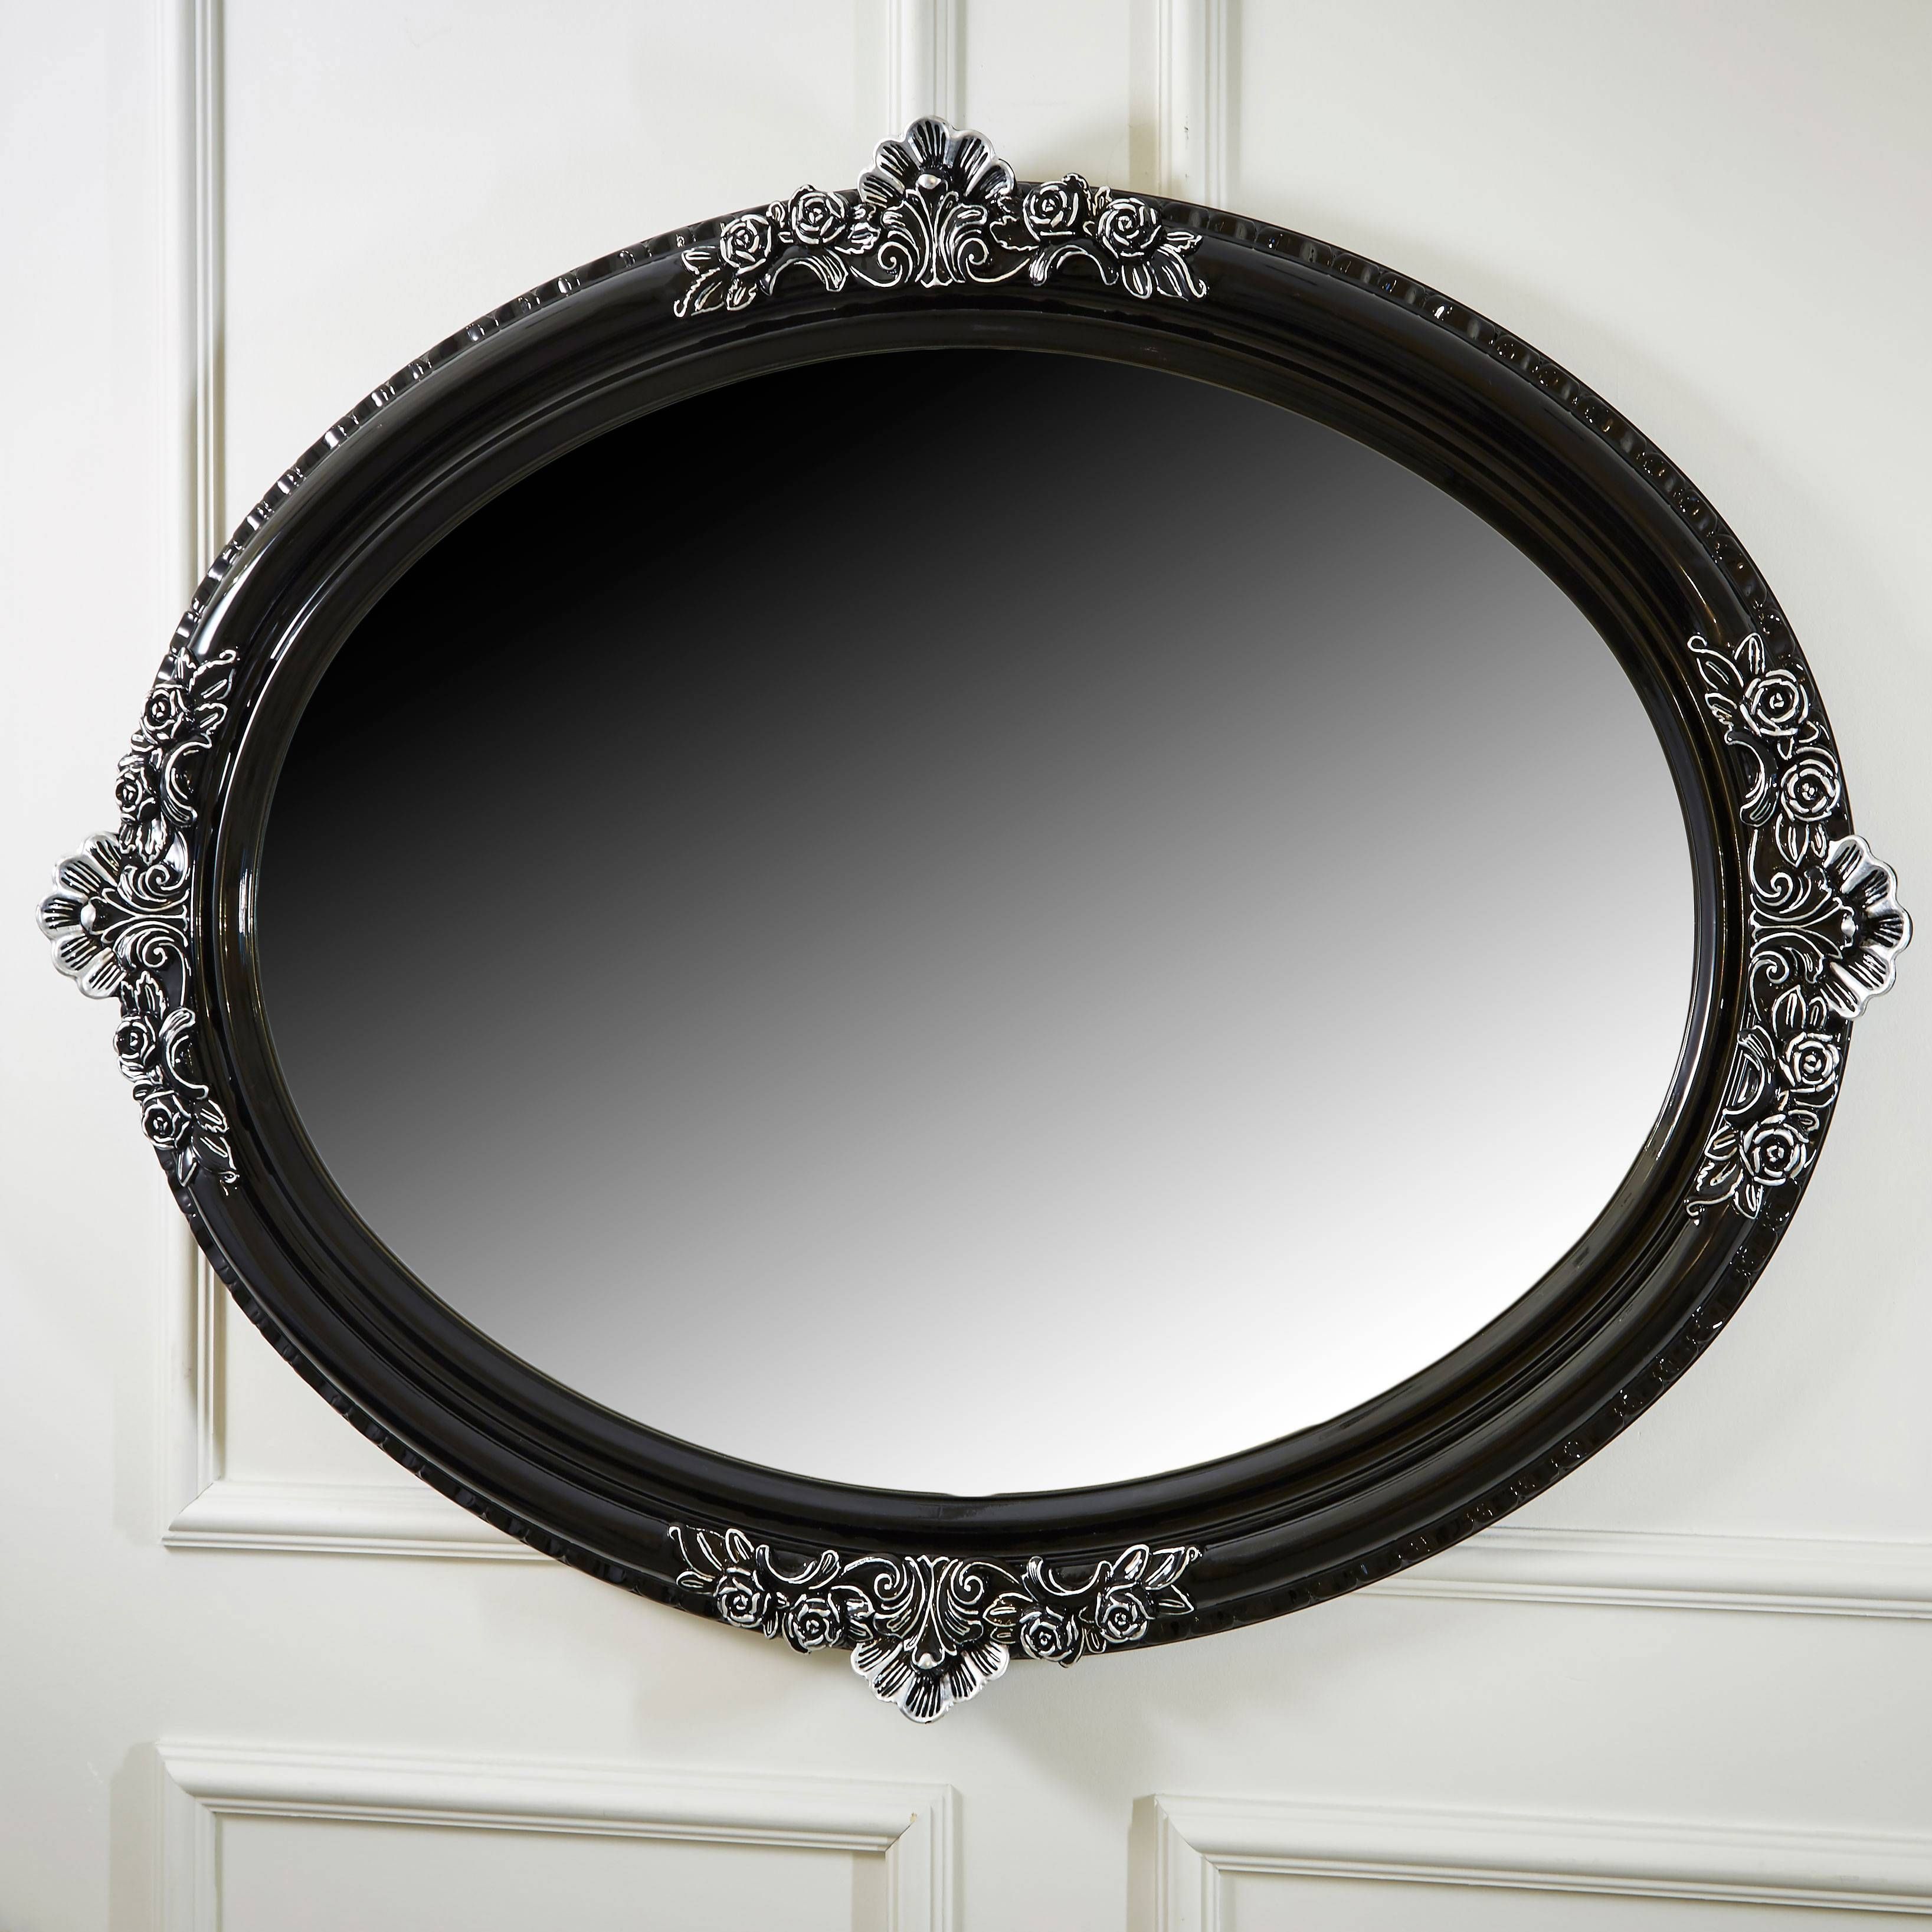 Ornate High Gloss Black Oval Mirror | Juliettes Interiors Pertaining To Oval Black Mirrors (View 13 of 25)